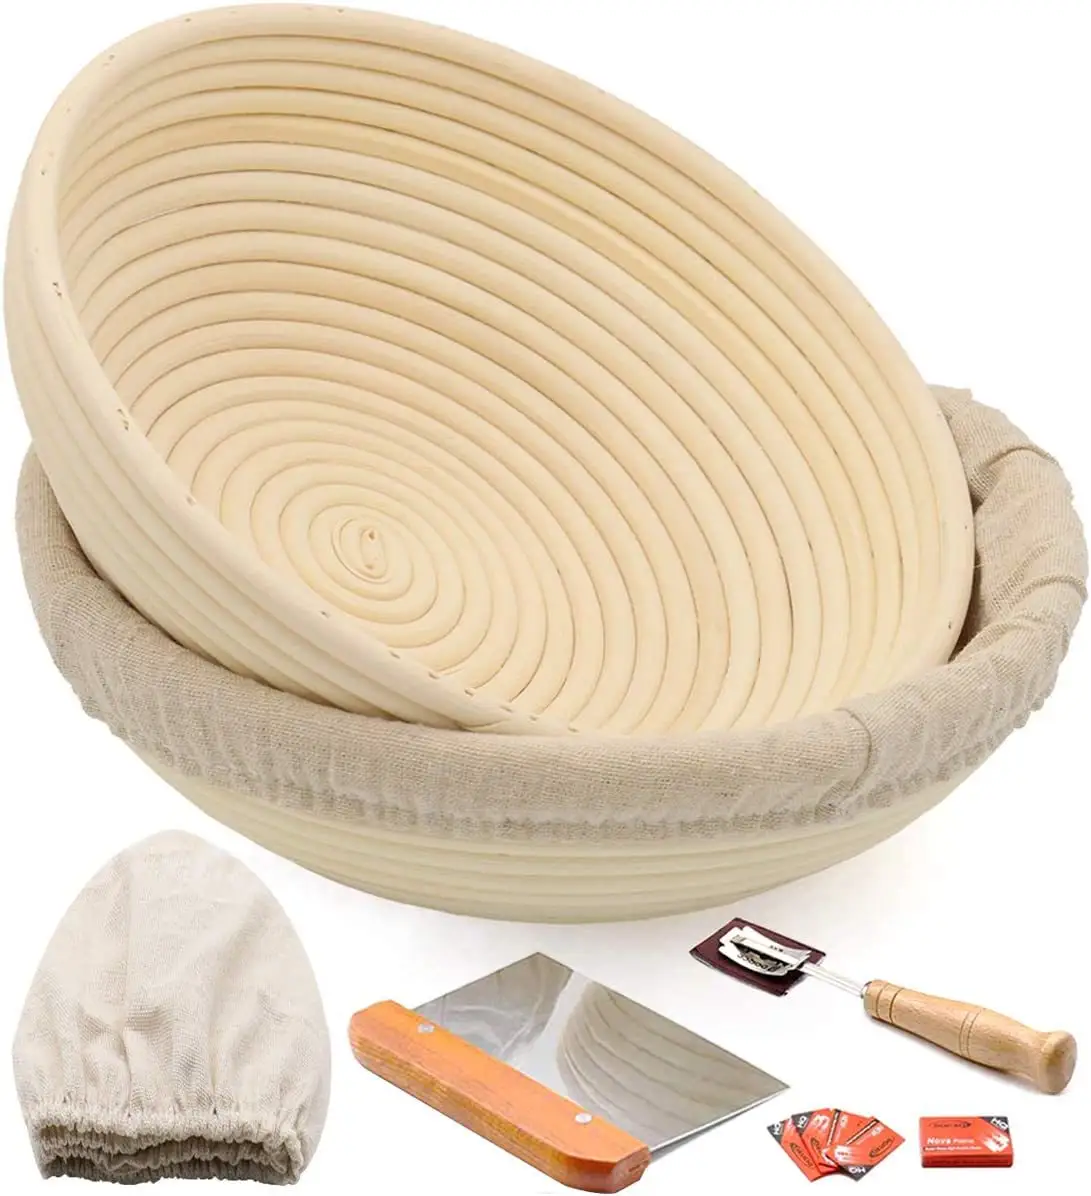 Round 9 Inches Indonesia Rattan Proving Brotform Bowl Sourdough Artisan Bread Banneton Proofing Basket Sets For Bakers